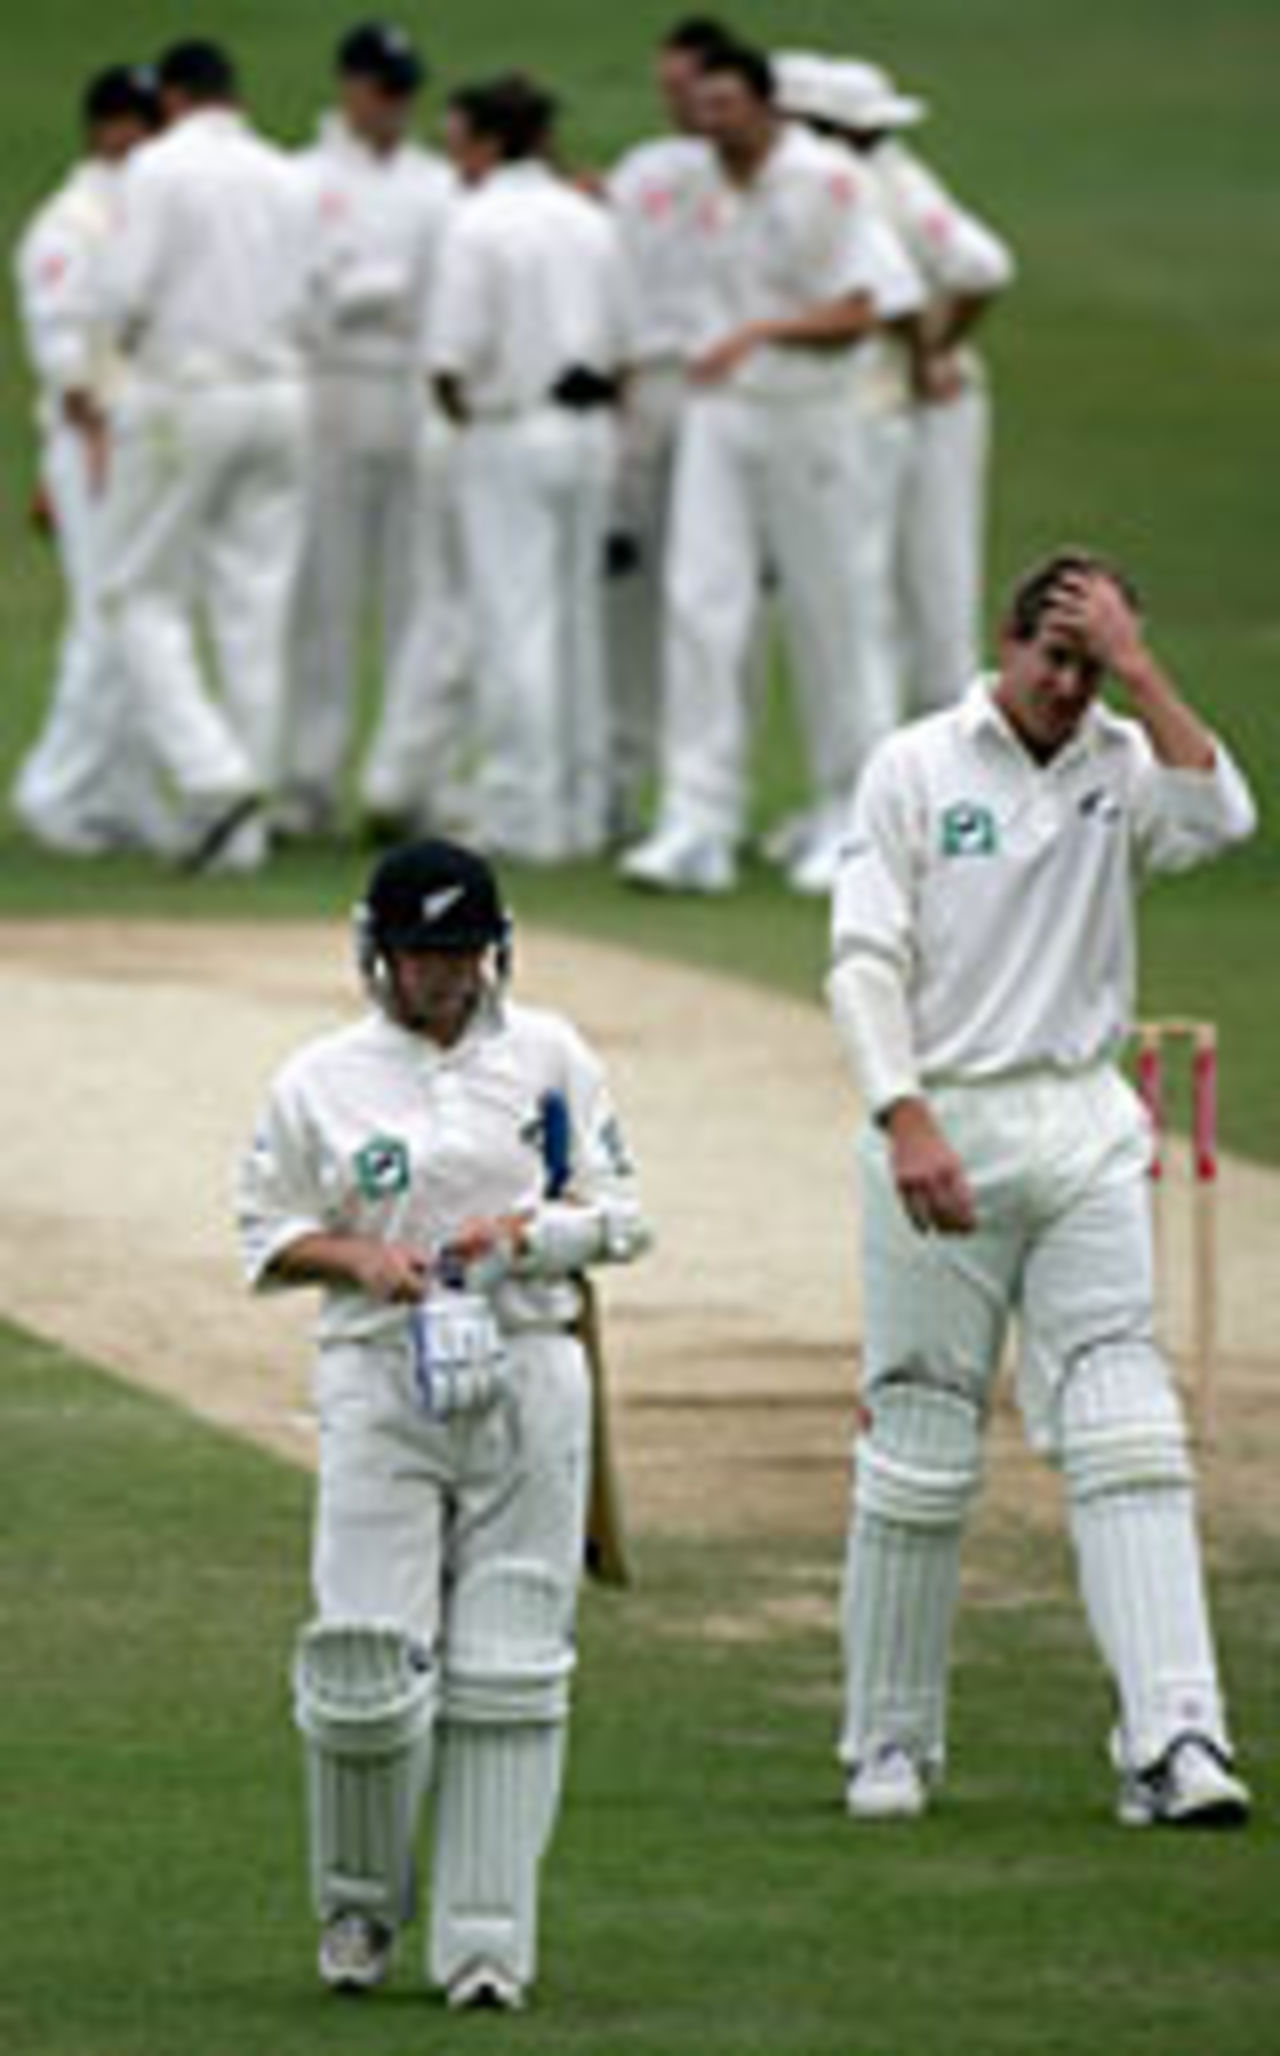 Jacob Oram looks on as Michael Papps departs, England v New Zealand, 2nd Test, Headingley, June 7, 2004